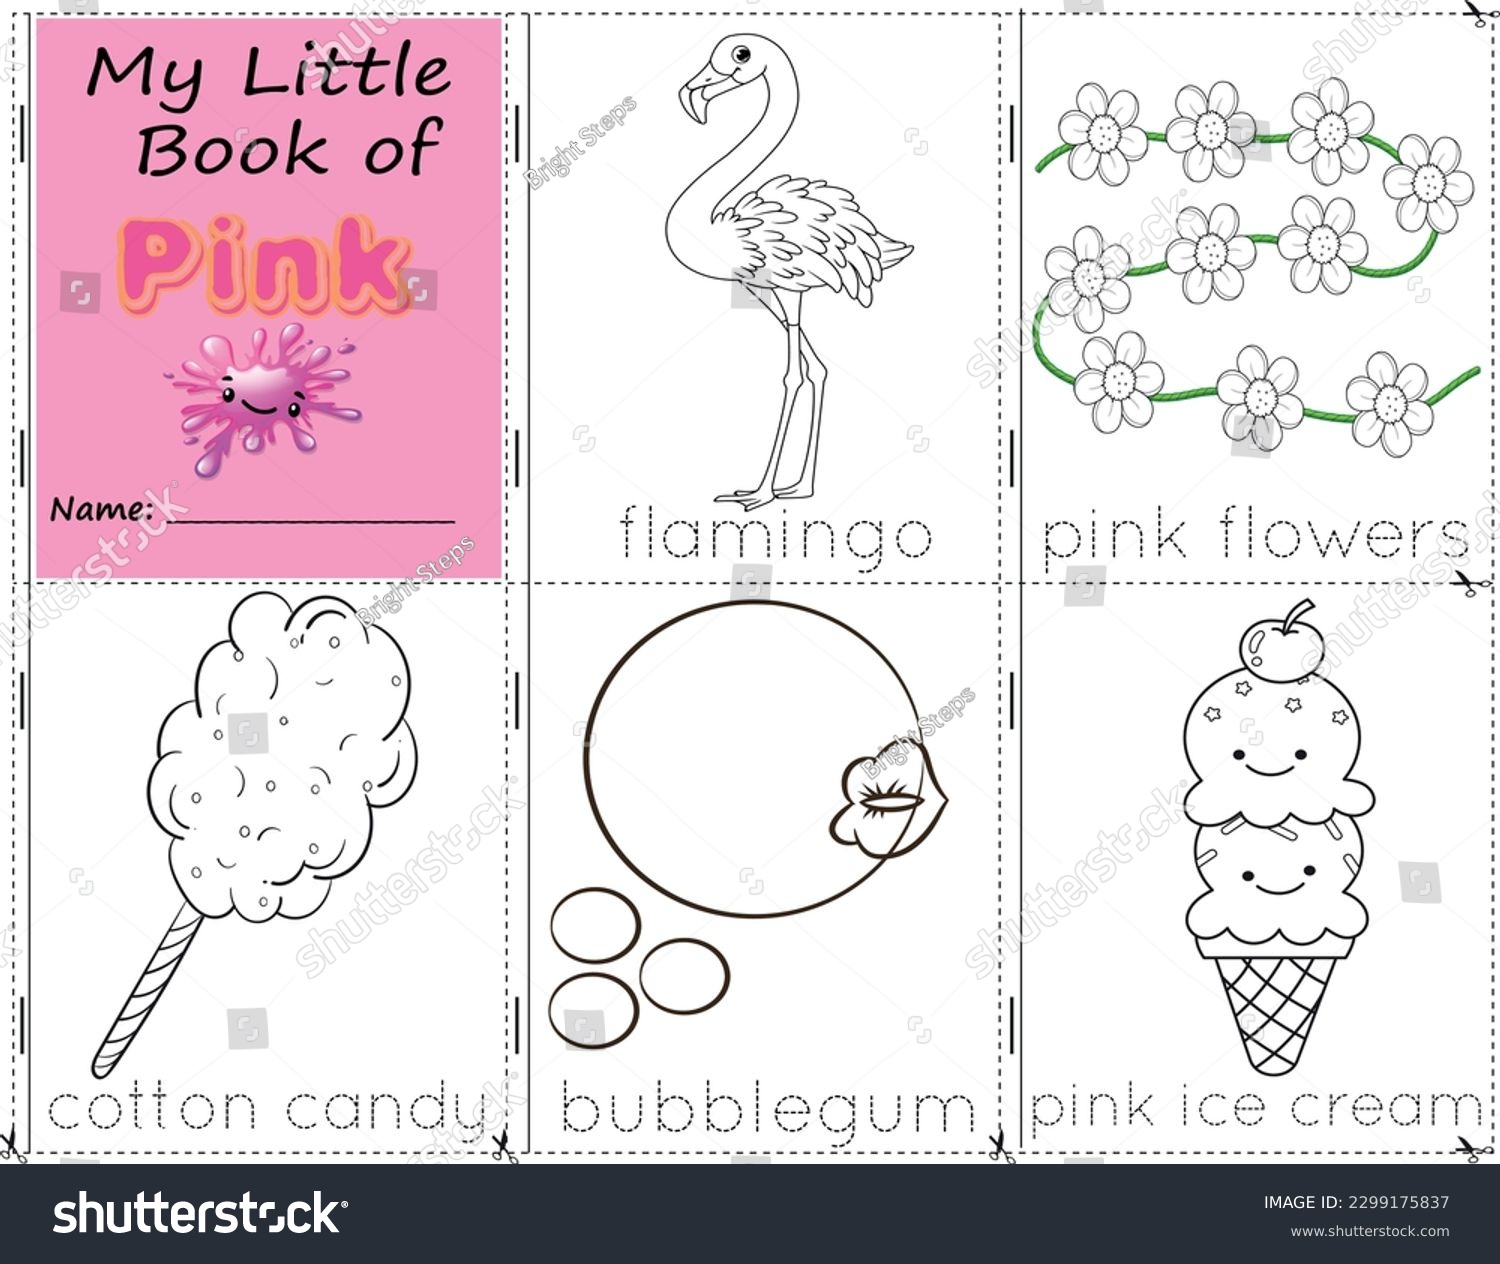 My little book pink color objects stock vector royalty free